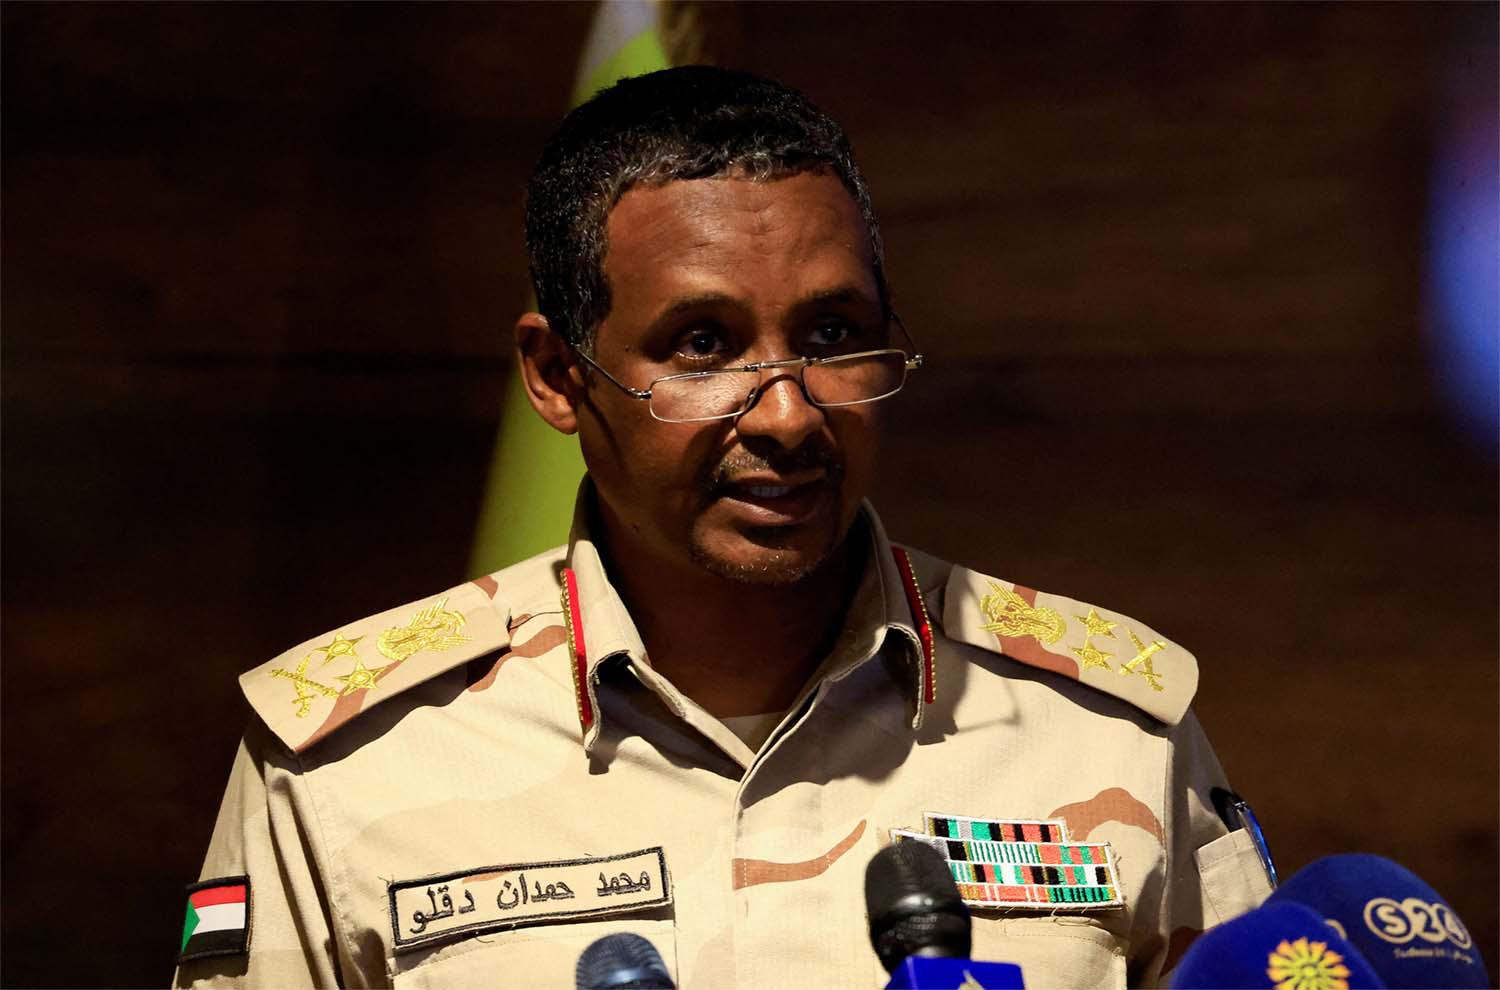 Dagalo appeared willing to negotiate with the army over the shape of the future Sudanese state